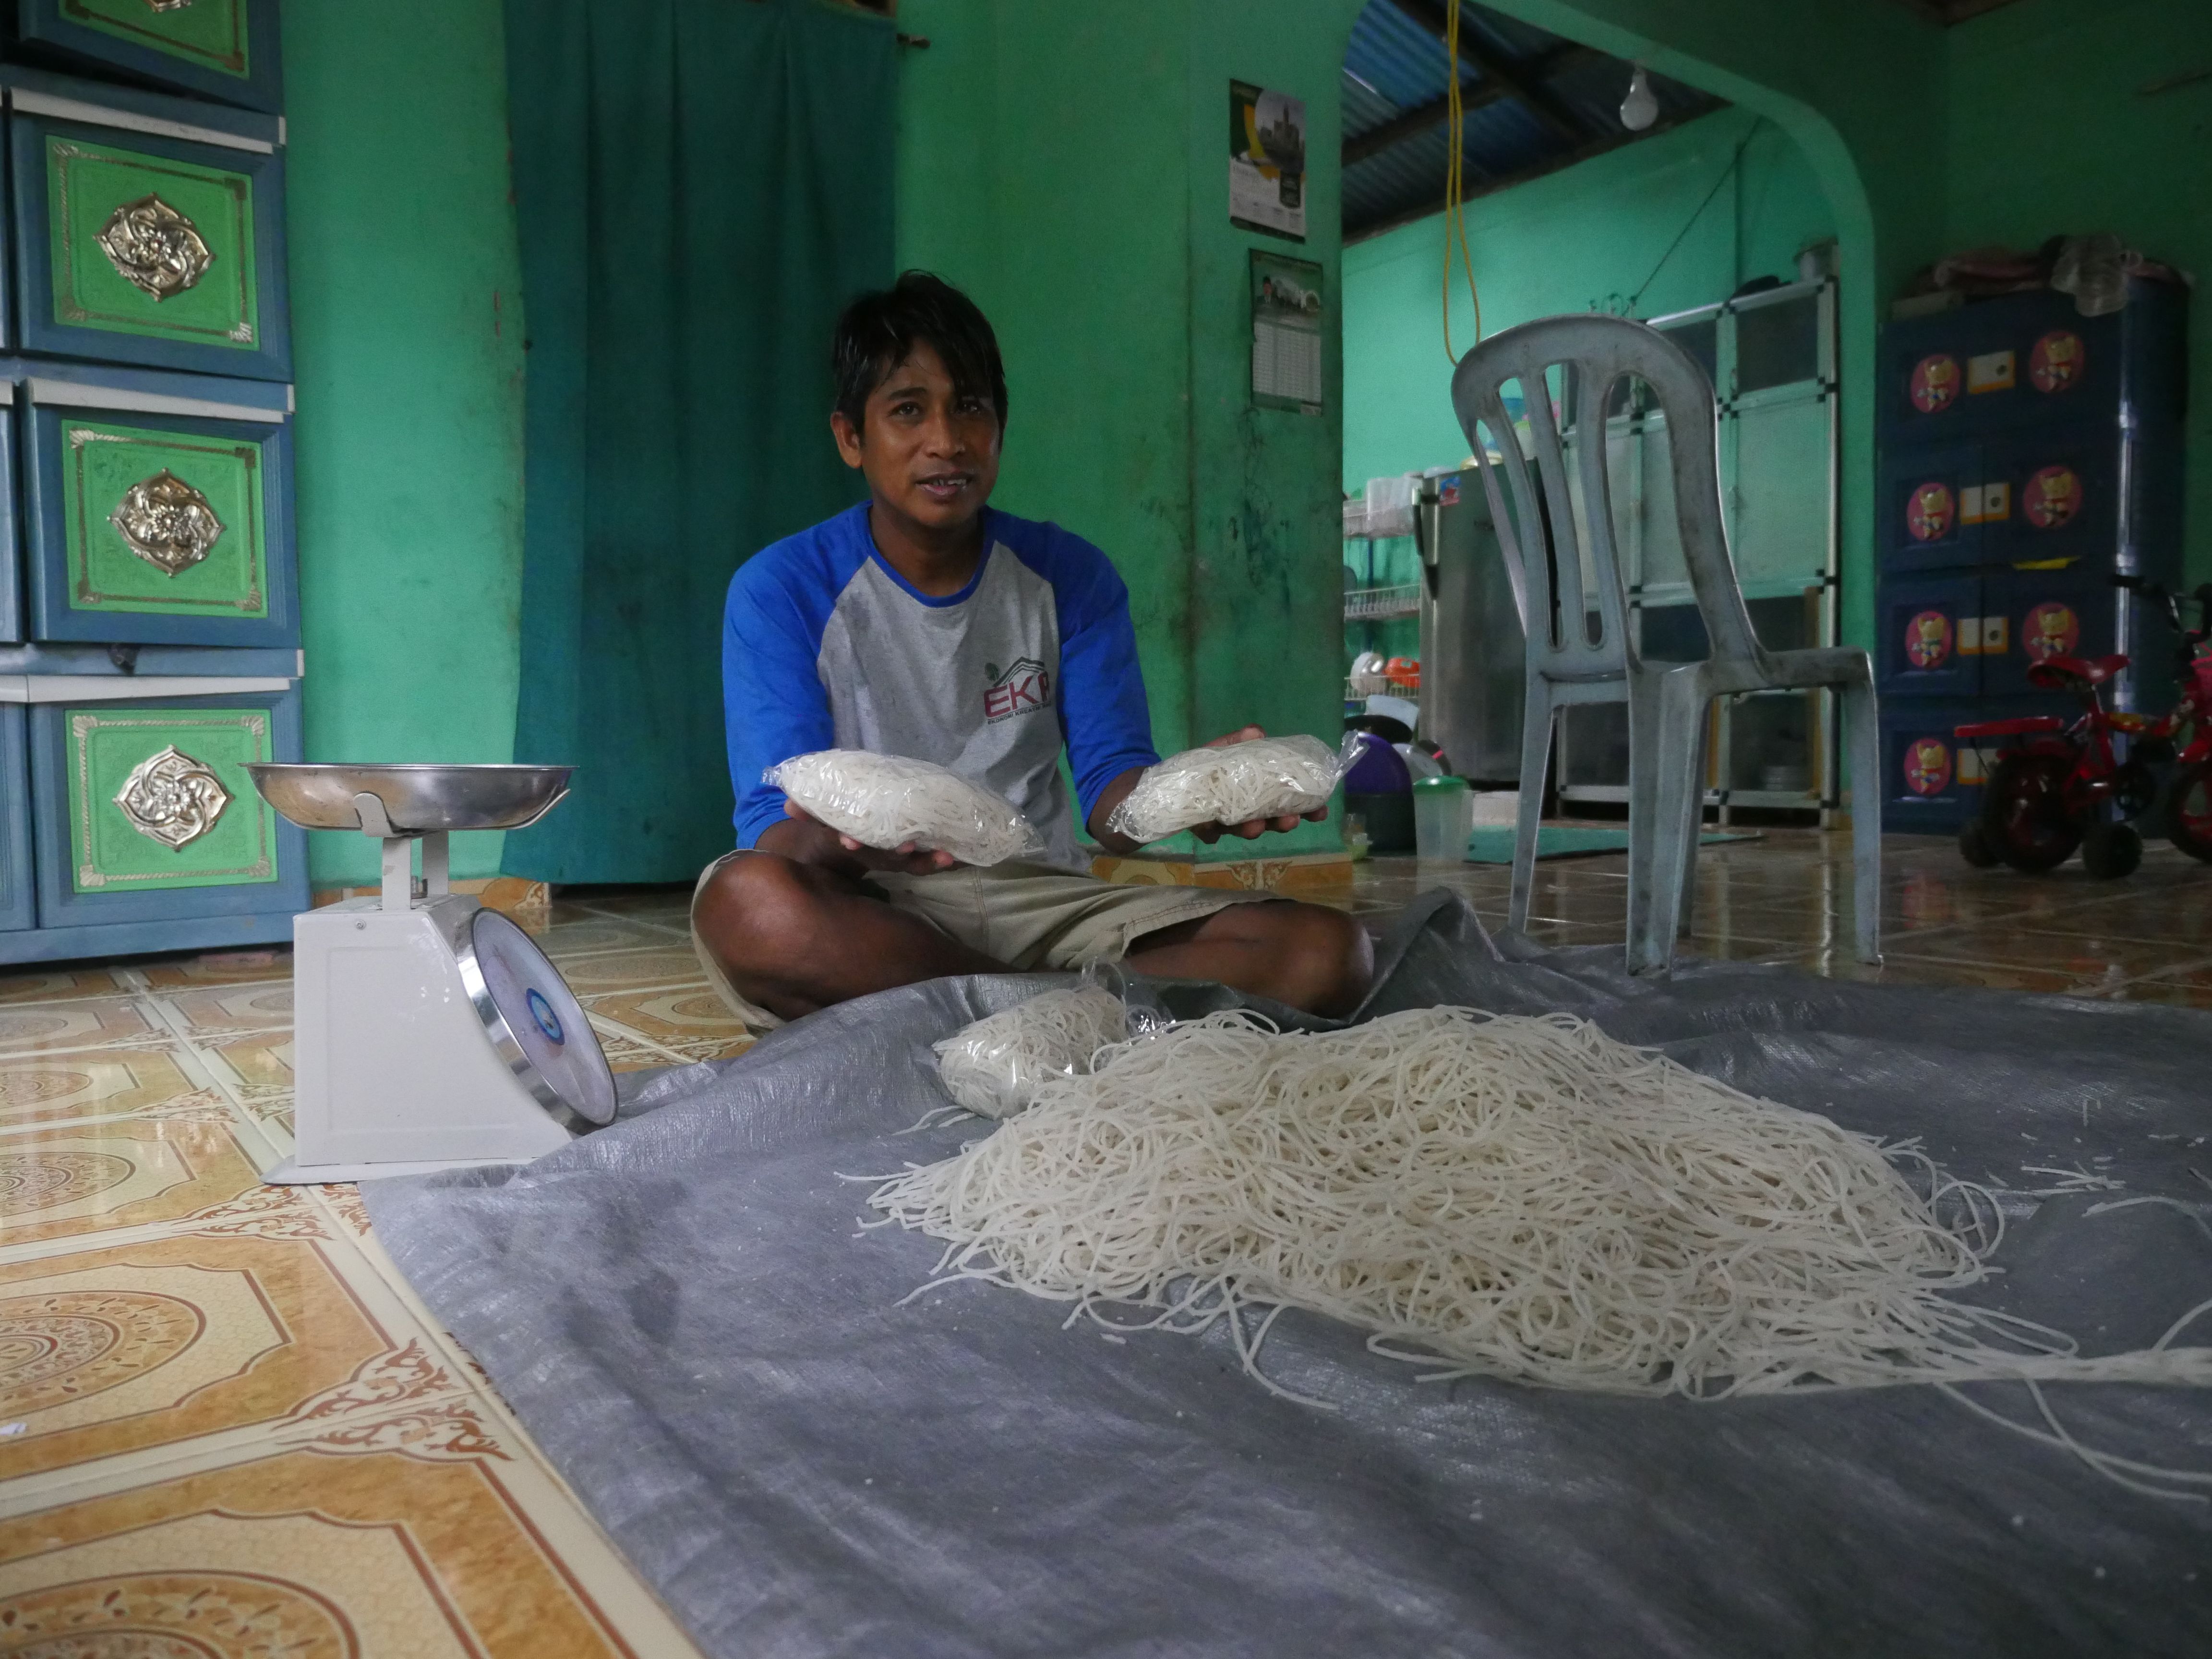 Abdul Manan makes sago noodles with a small pasta maker and packs them for retail sale in plastic bags. He sells about one ton of pasta each month. Image by Daniel Grossman. Indonesia, 2019.